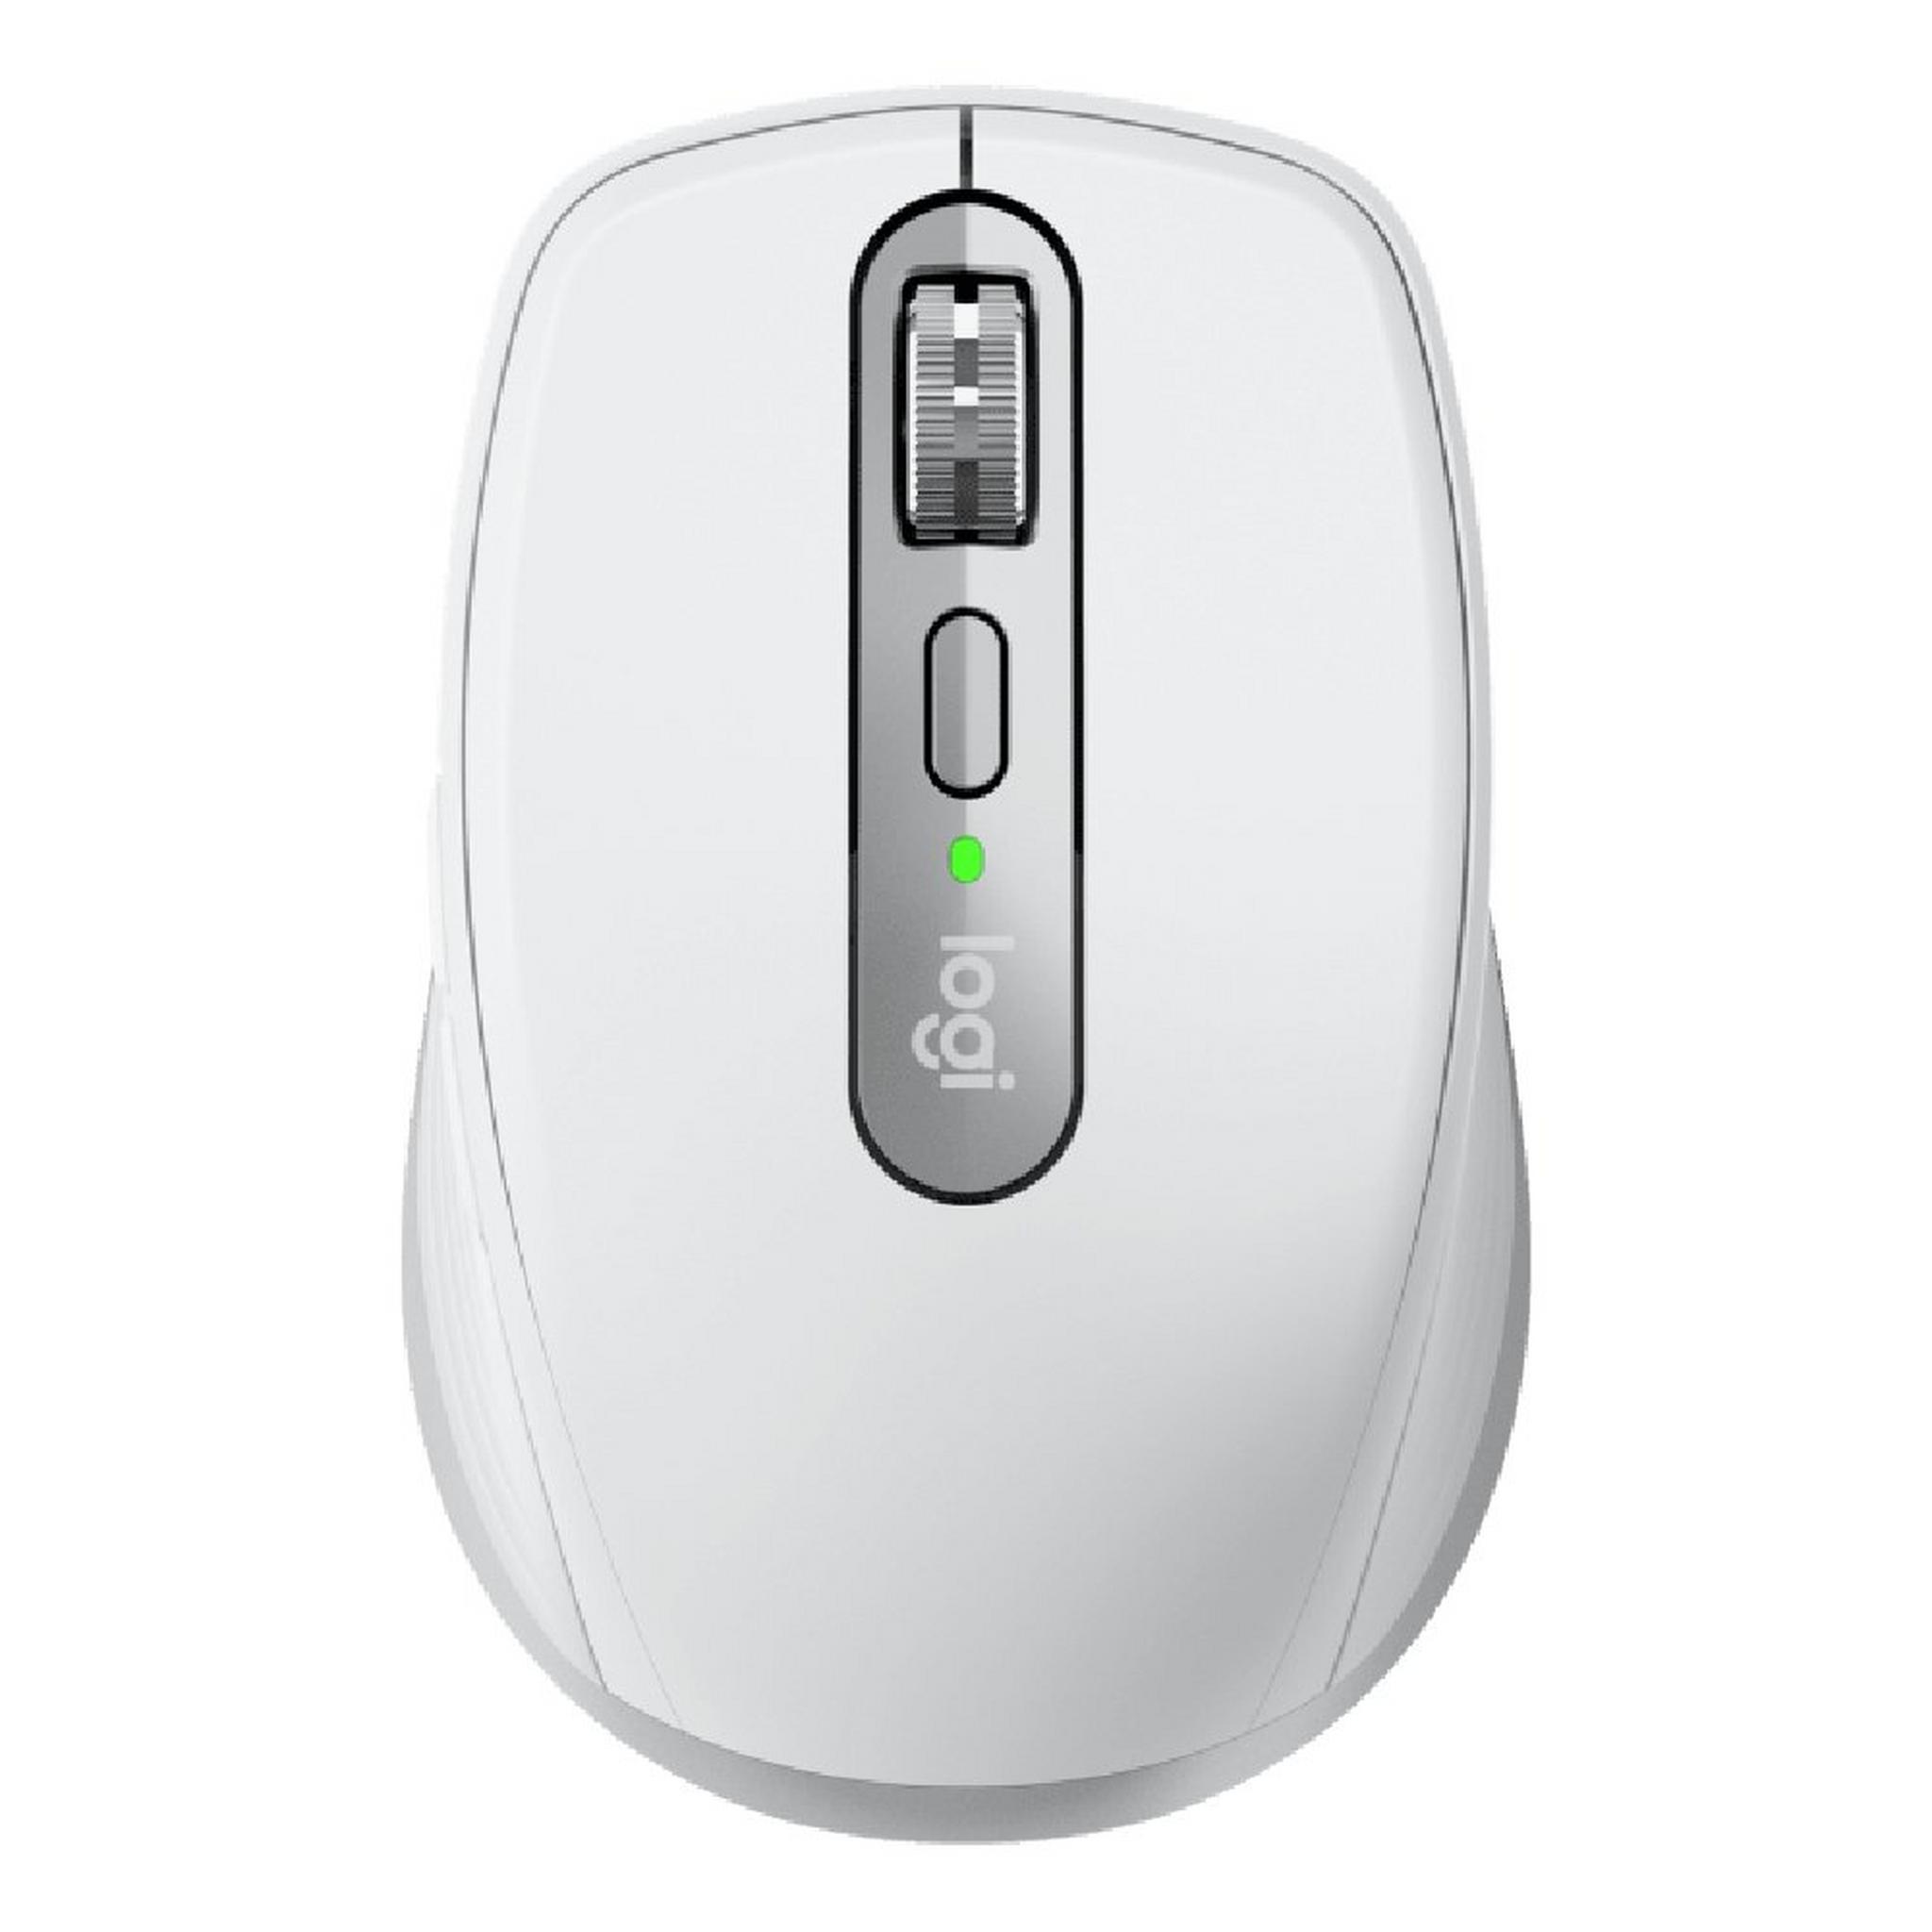 Logitech MX Anywhere 3 Wireless Mouse for Mac -  Grey